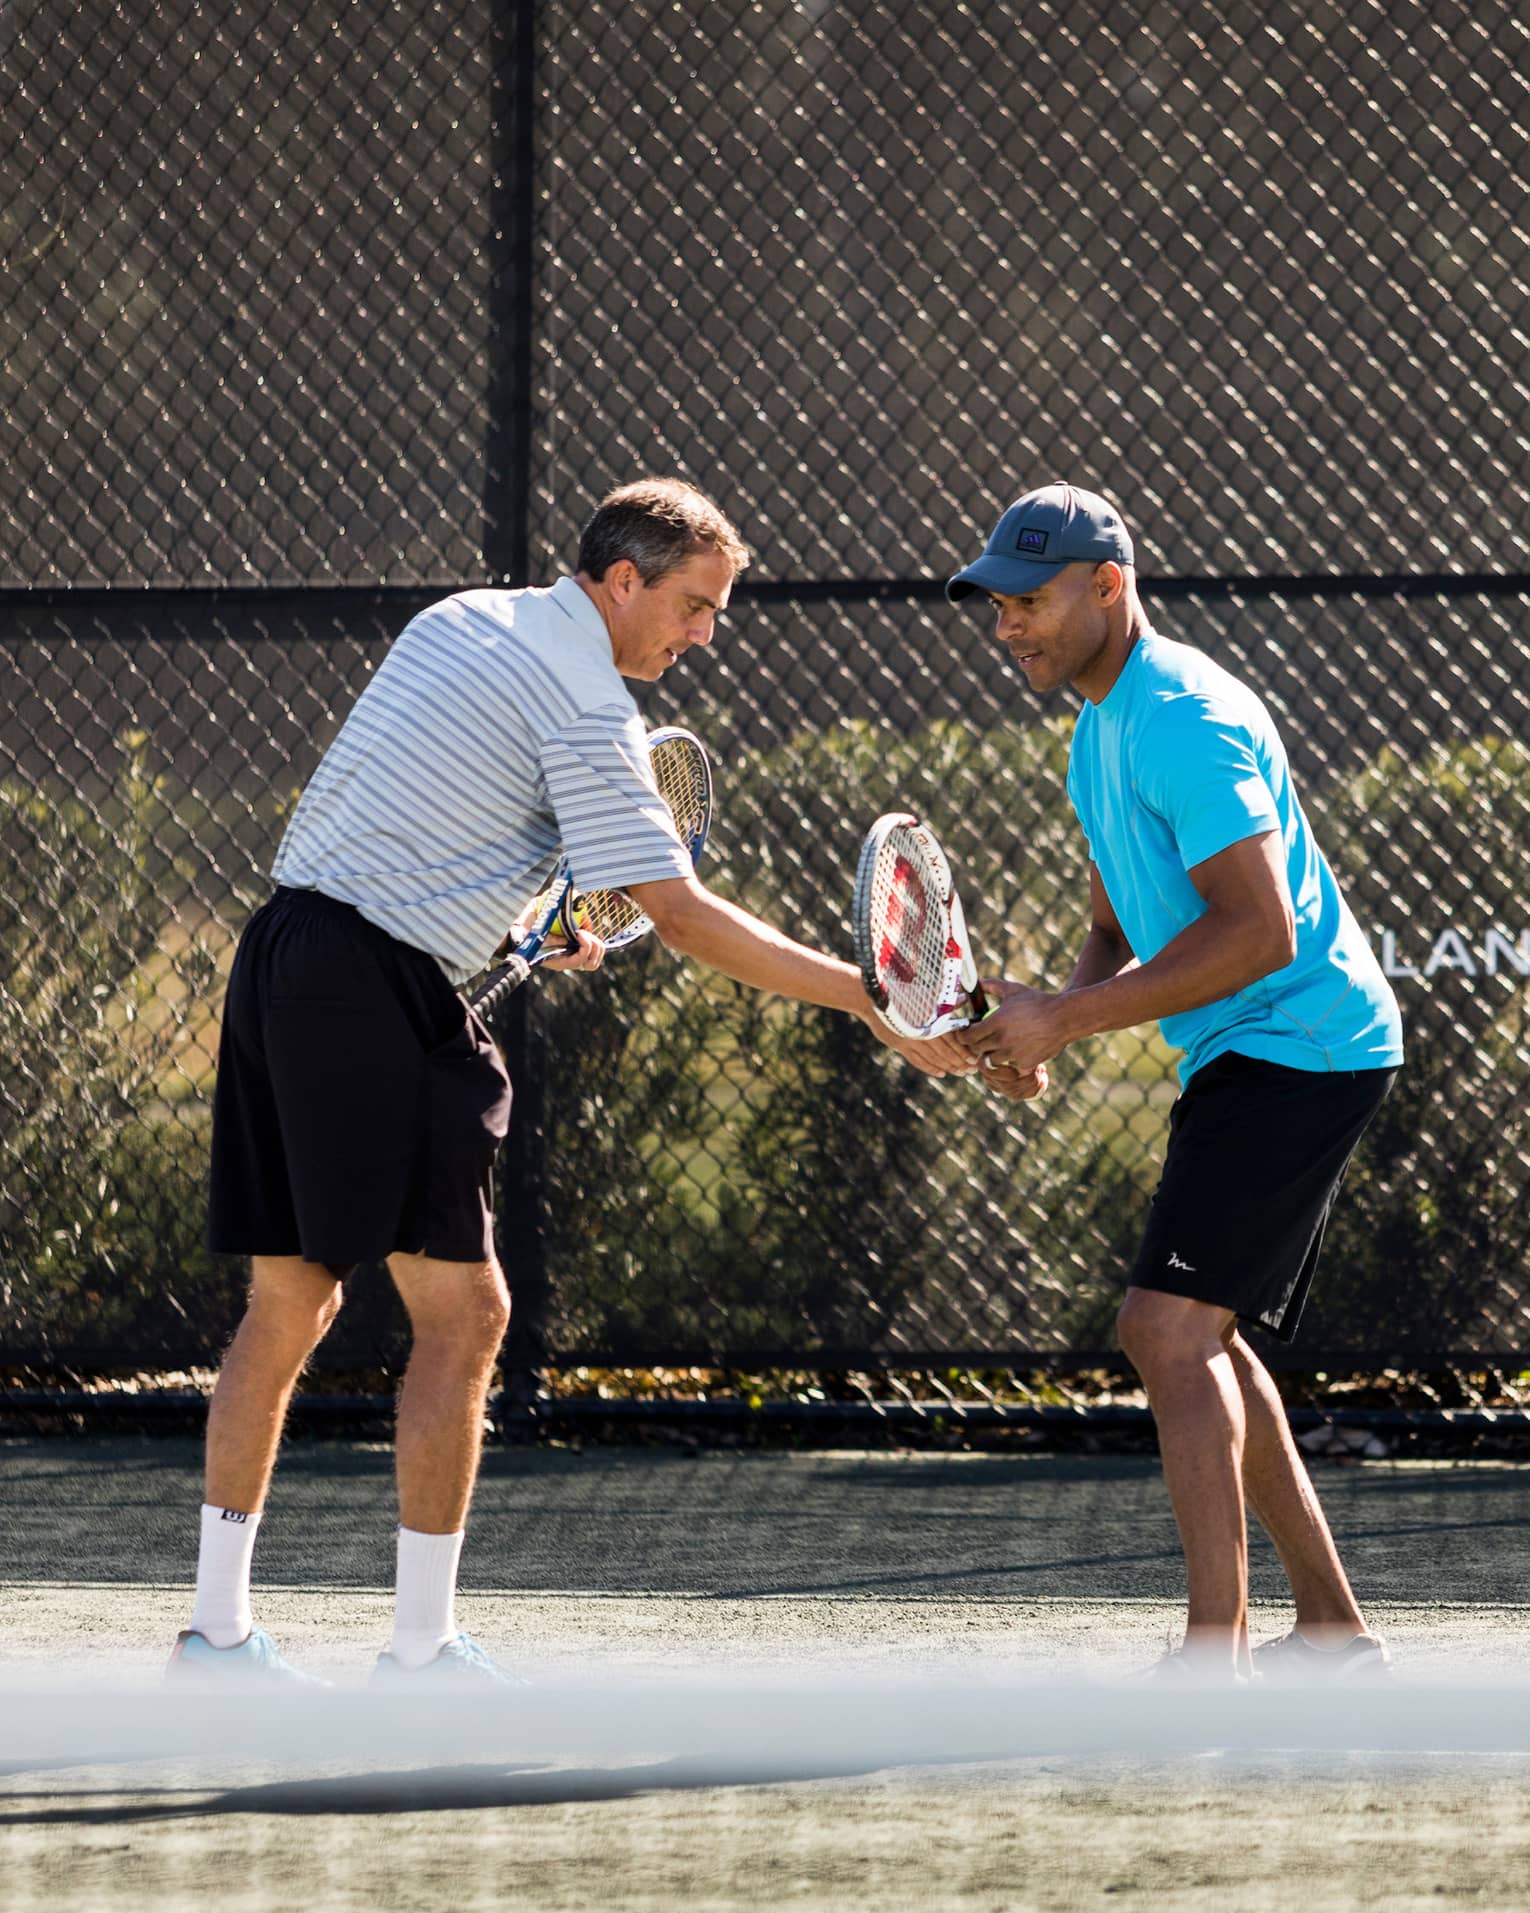 Tennis pro helps man adjust his racket on tennis court by Four Seasons Resort logo on fence